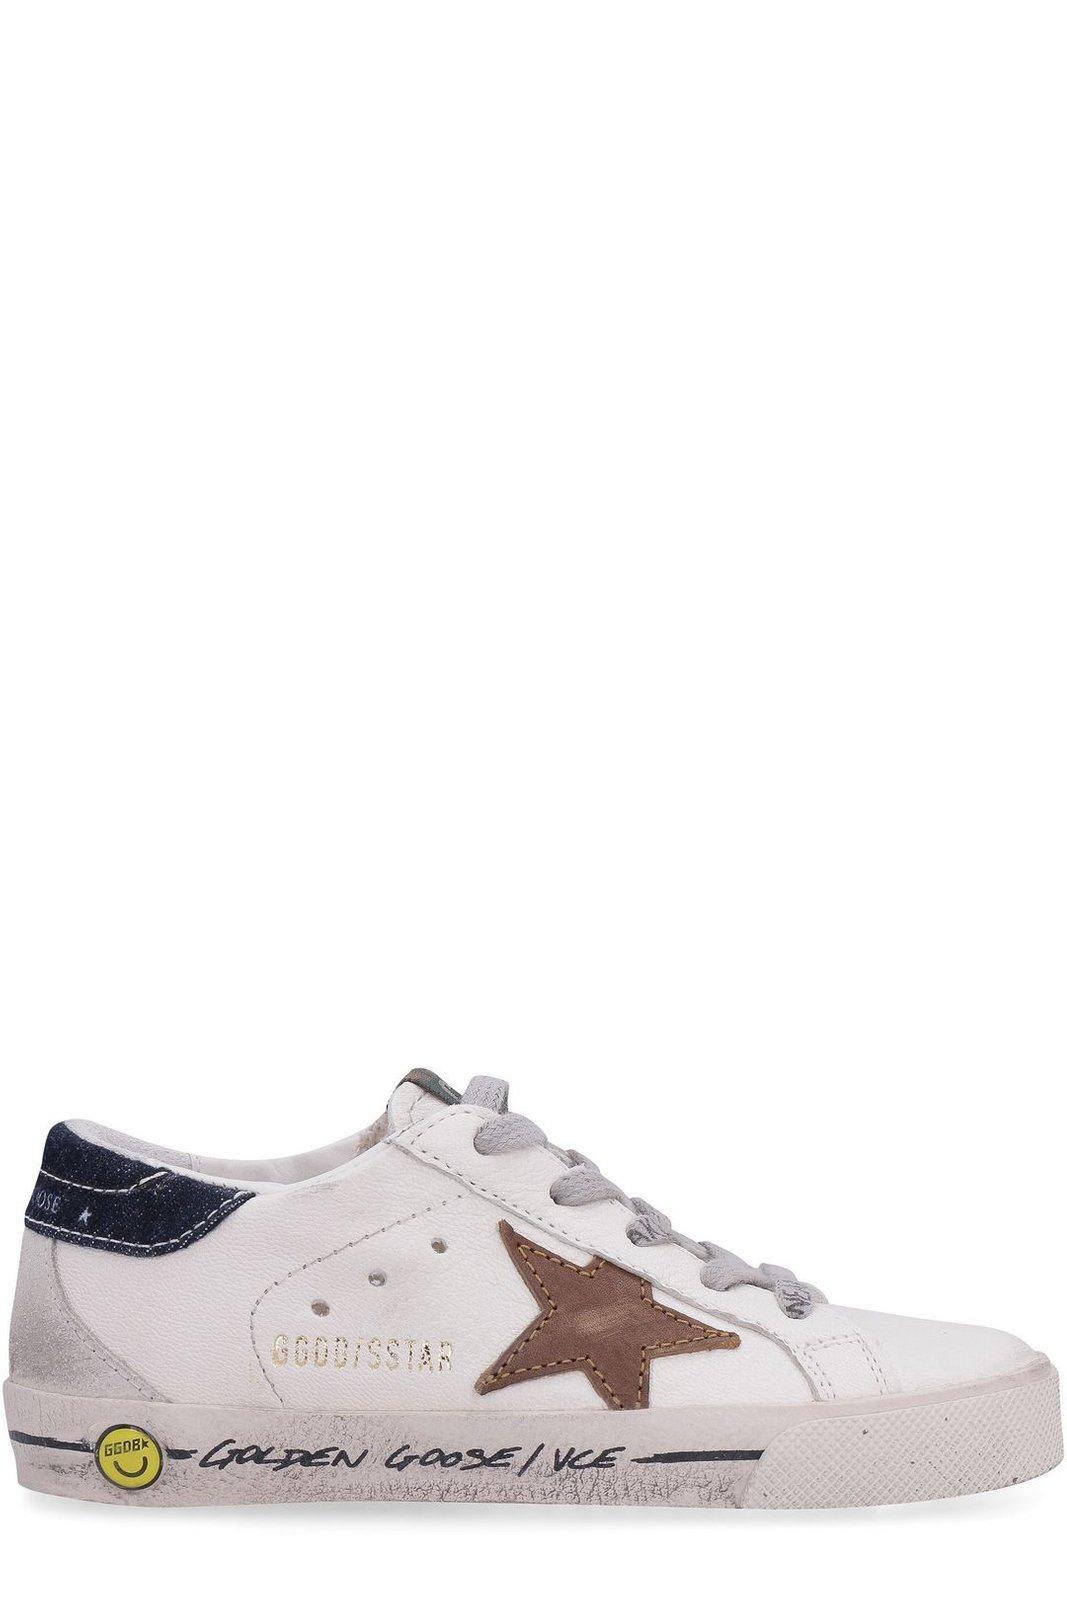 Golden Goose Super-star Lace-up Sneakers